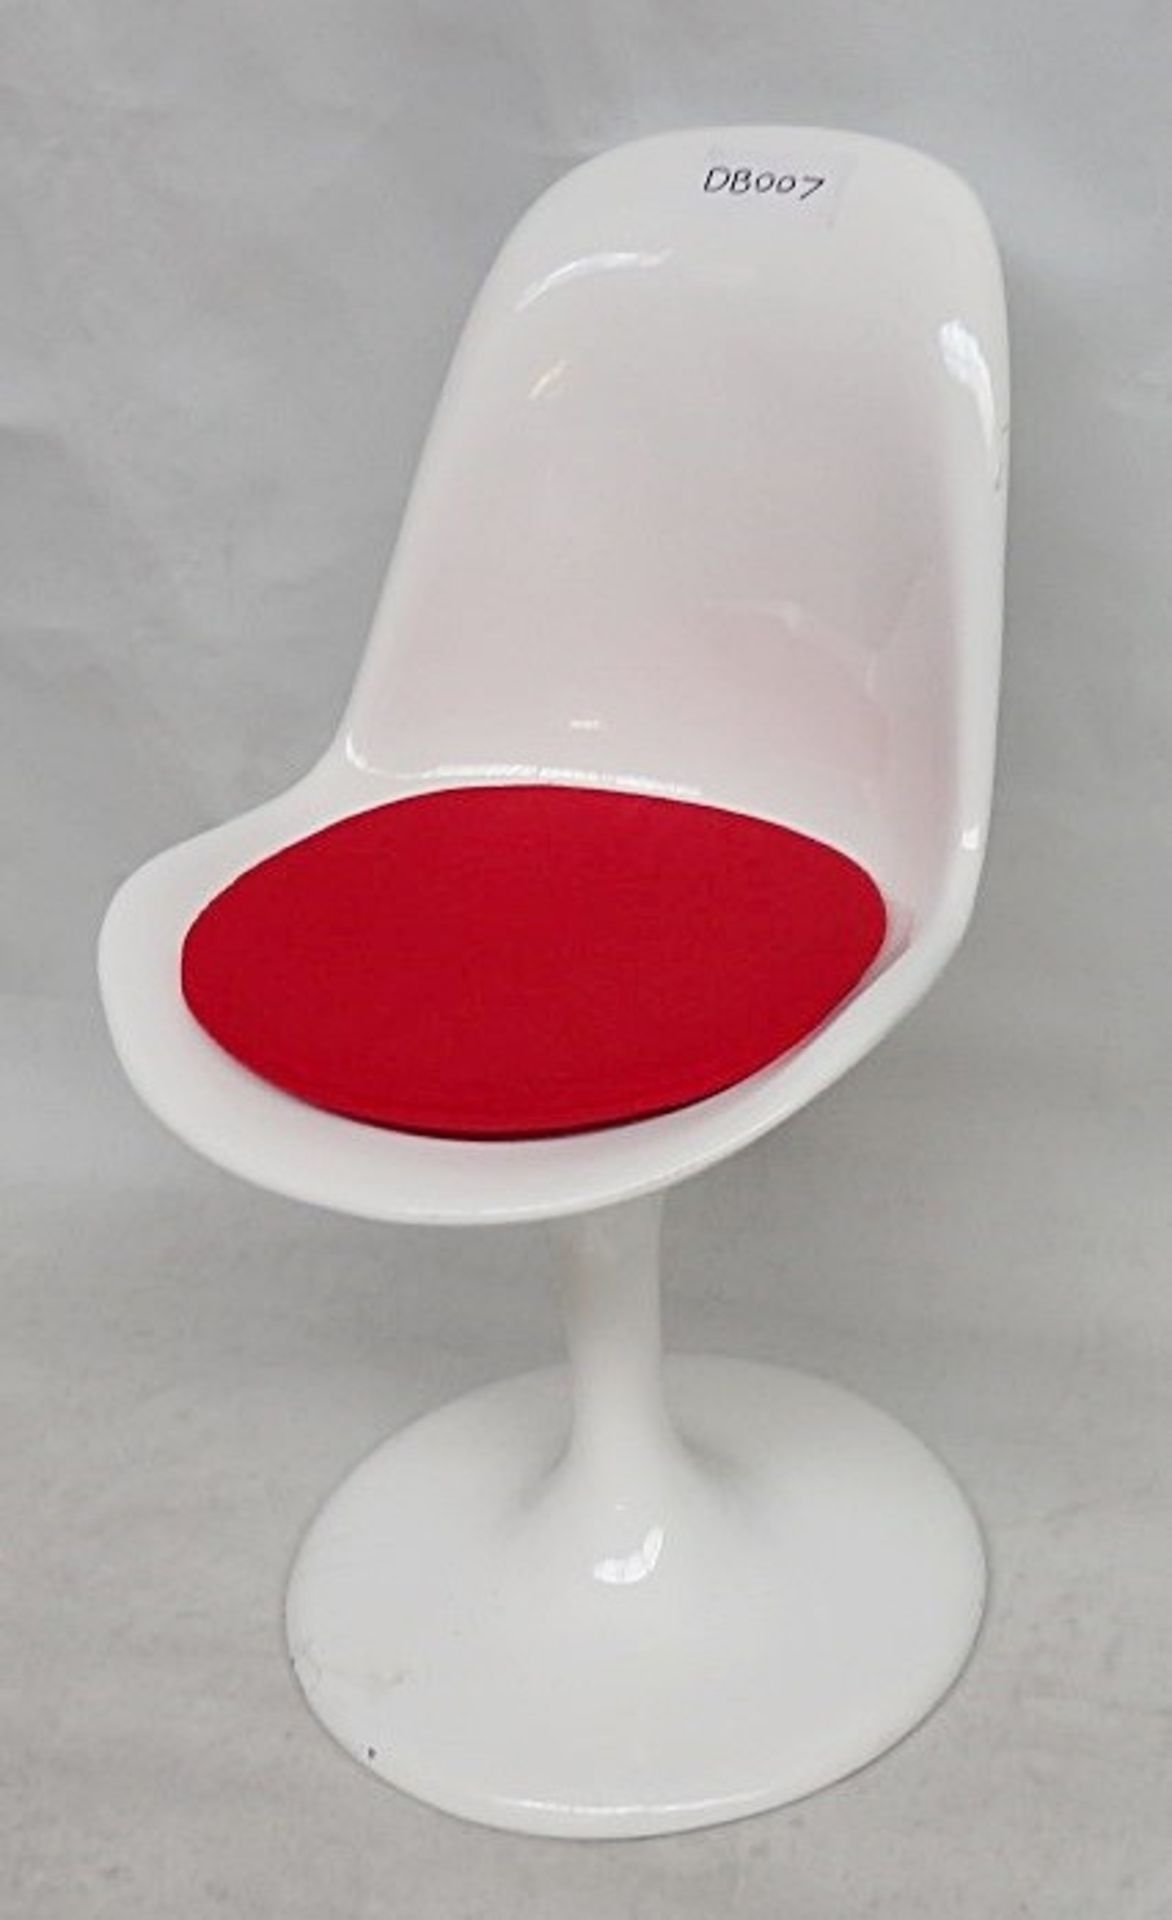 1 x Retro Style Swivel Chair With A White Hi-gloss Finish - Includes Cushion As Shown - - Image 2 of 14